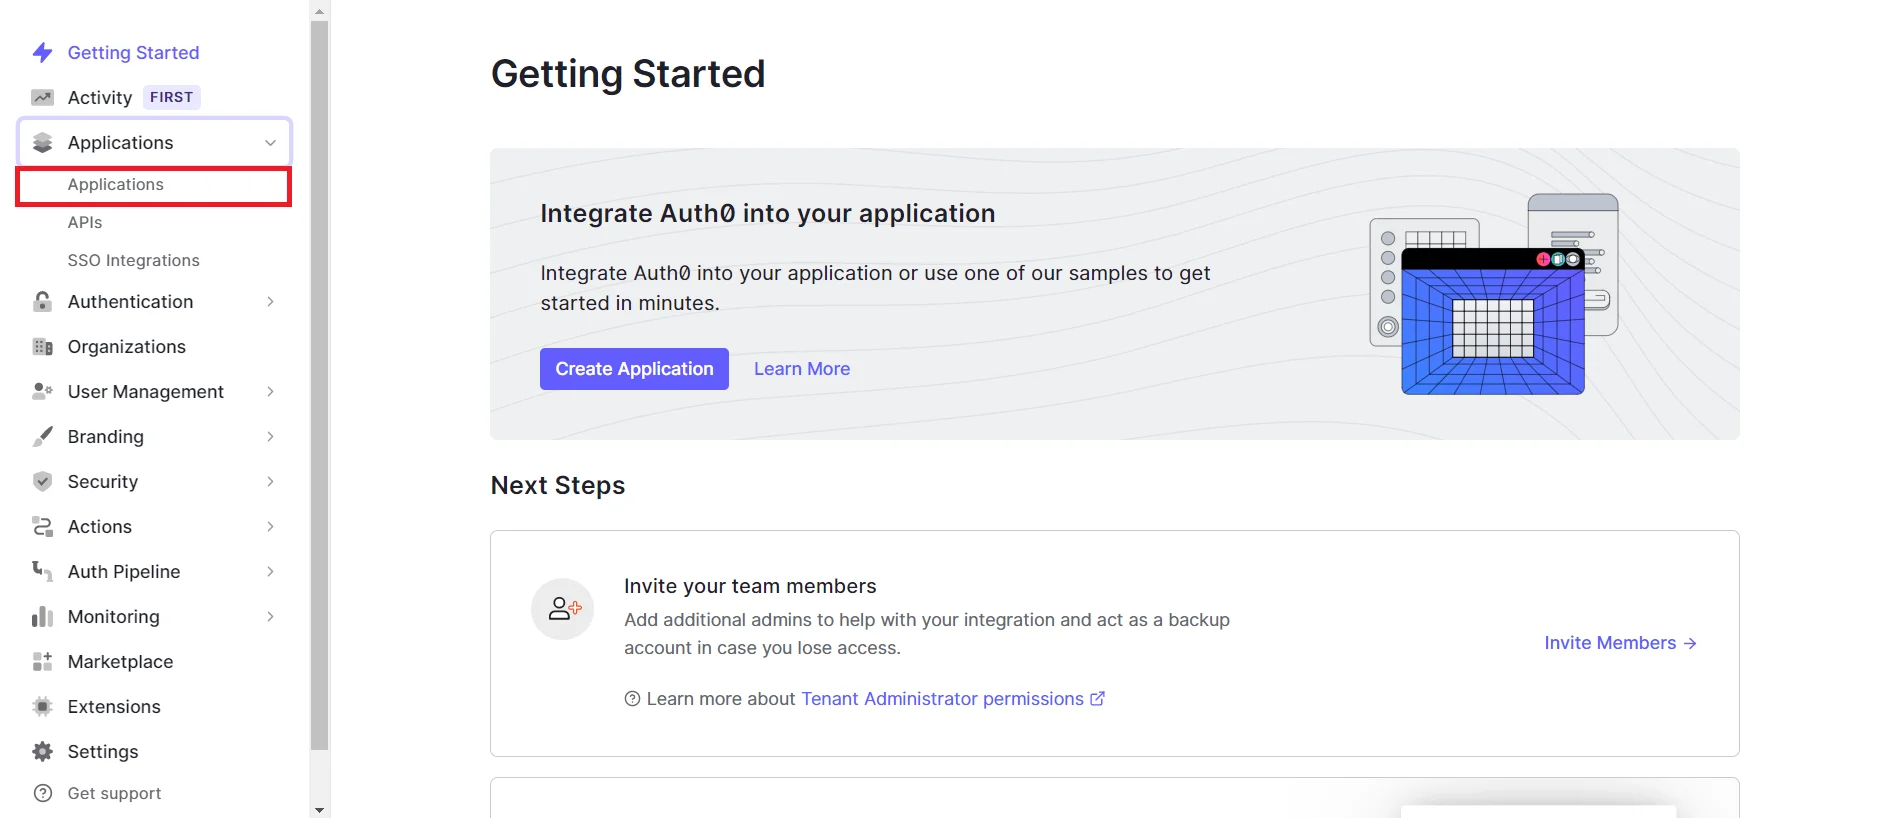 nopCommerce OAuth Single Sign-On (SSO) using Auth0 as IDP - go to applications